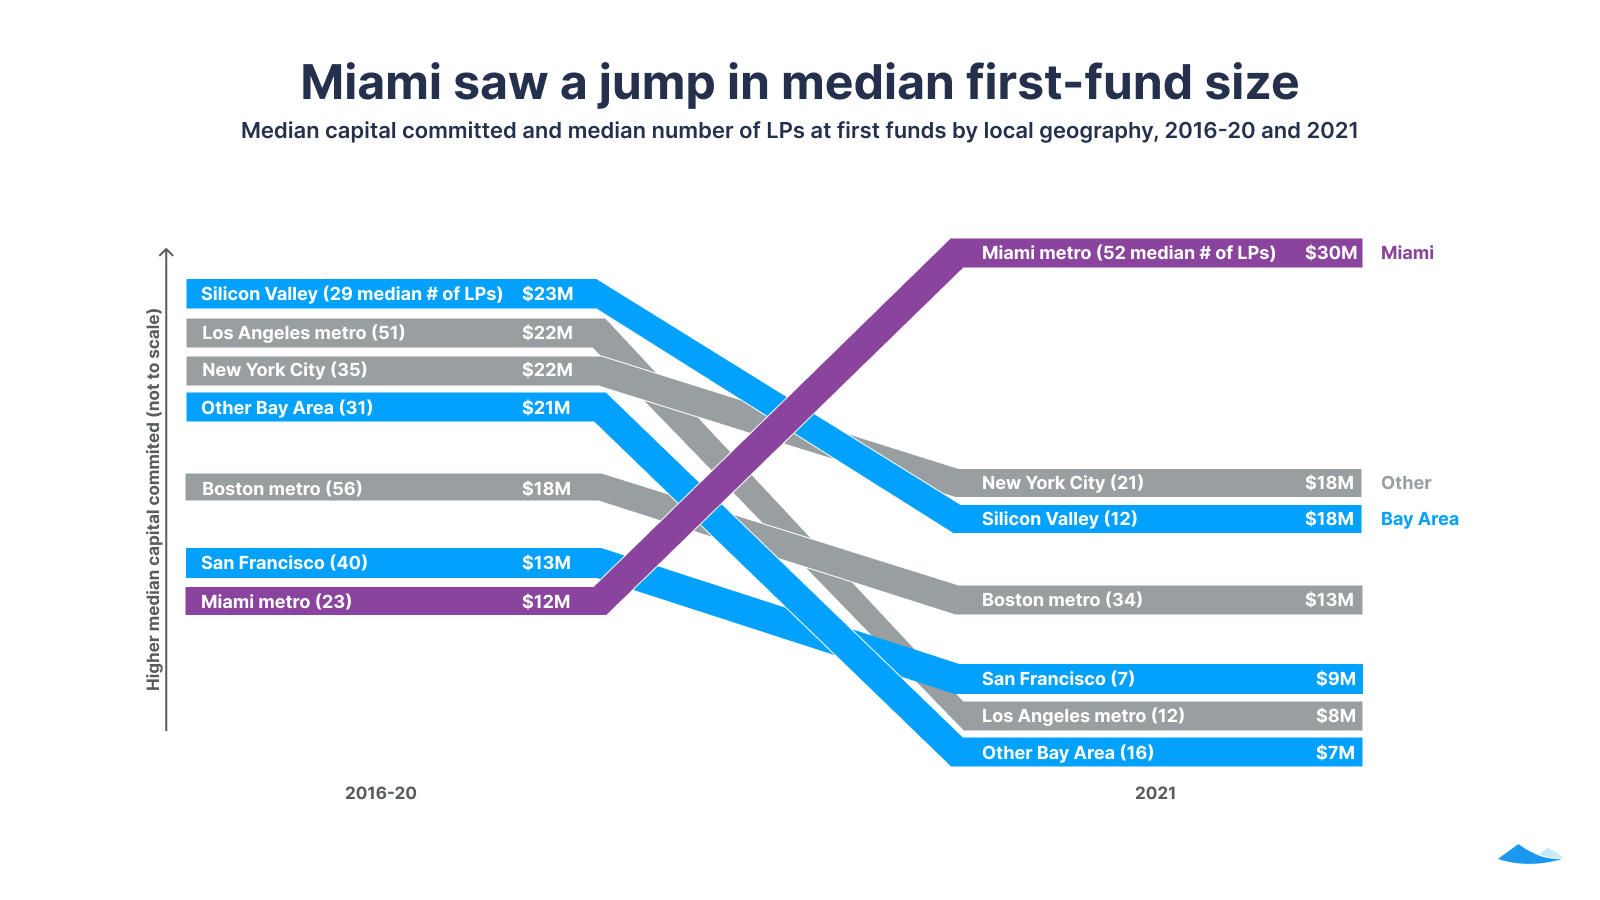 Miami saw a jump in median first-fund size: Median capital committed and median number of LPs at first funds by local geography, 2016-20 and 2021